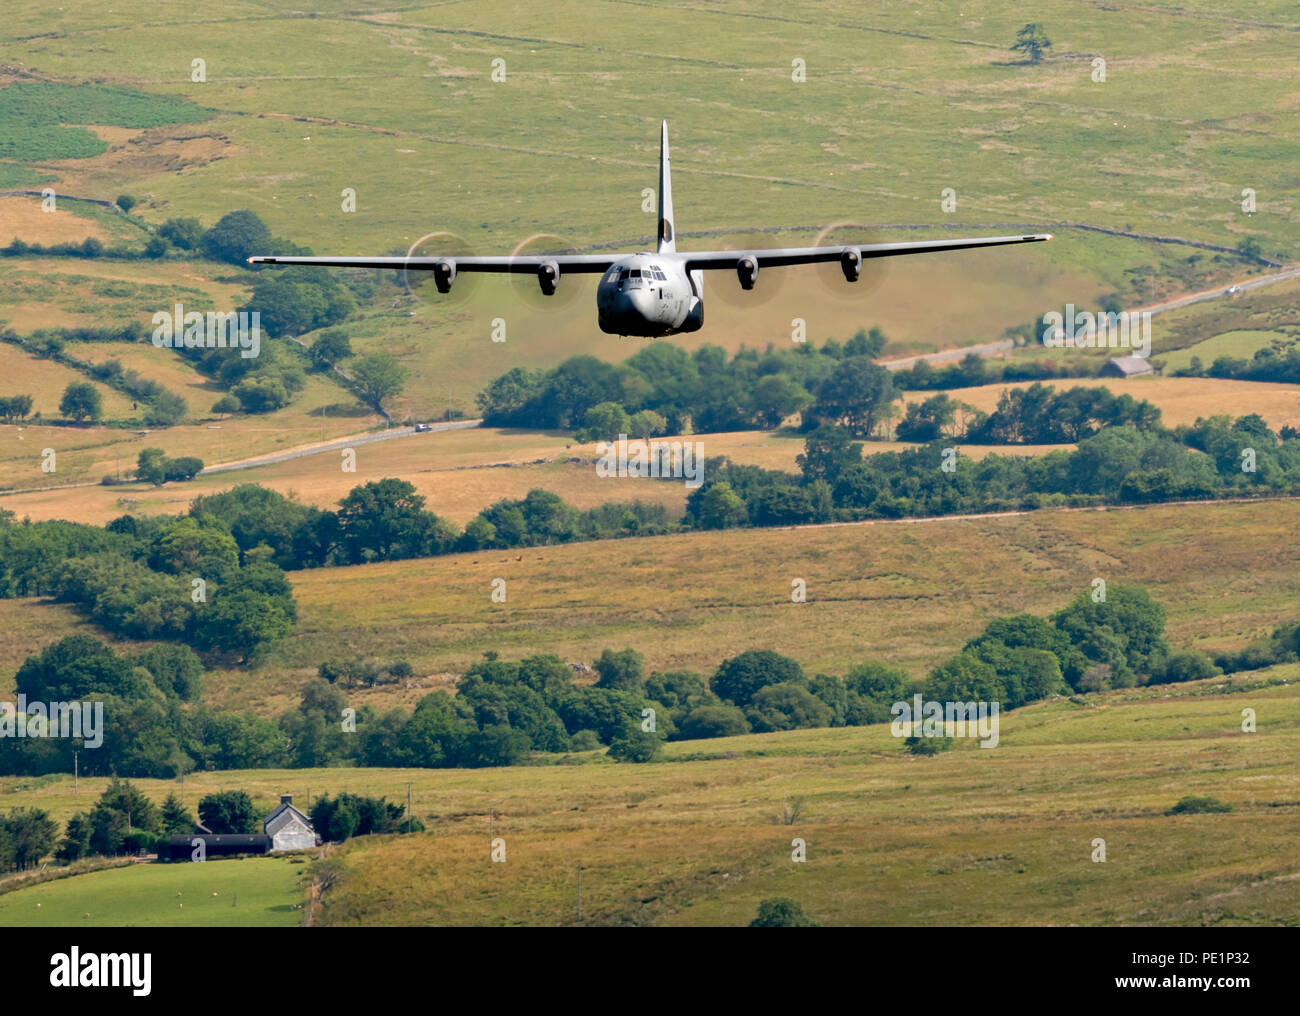 Royal Canadian Air Force, CC-130J Super Hercules 614, flying low level in the Mach Loop Stock Photo